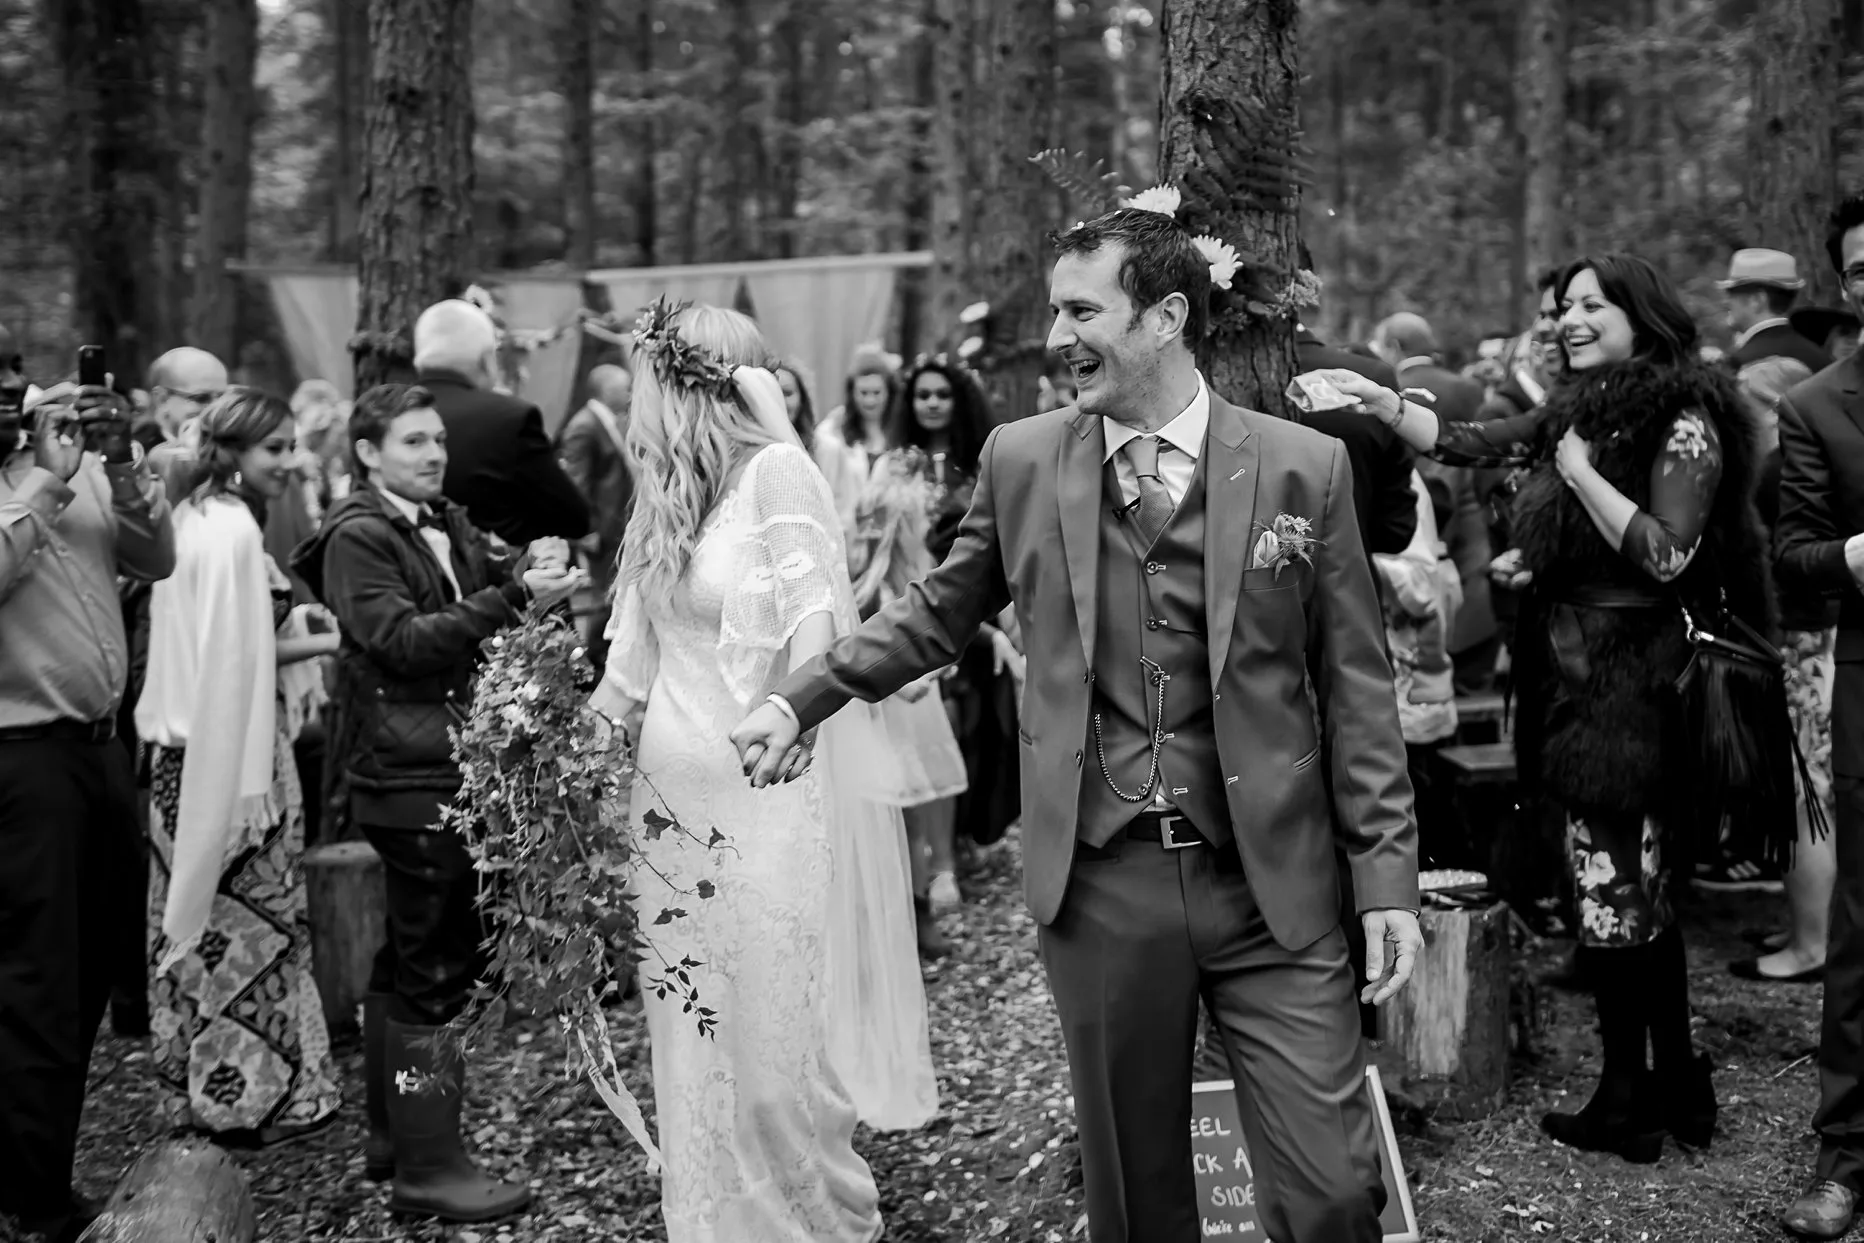 Groom laughing and smiling at wedding guests as he walks with his wife down the aisle.